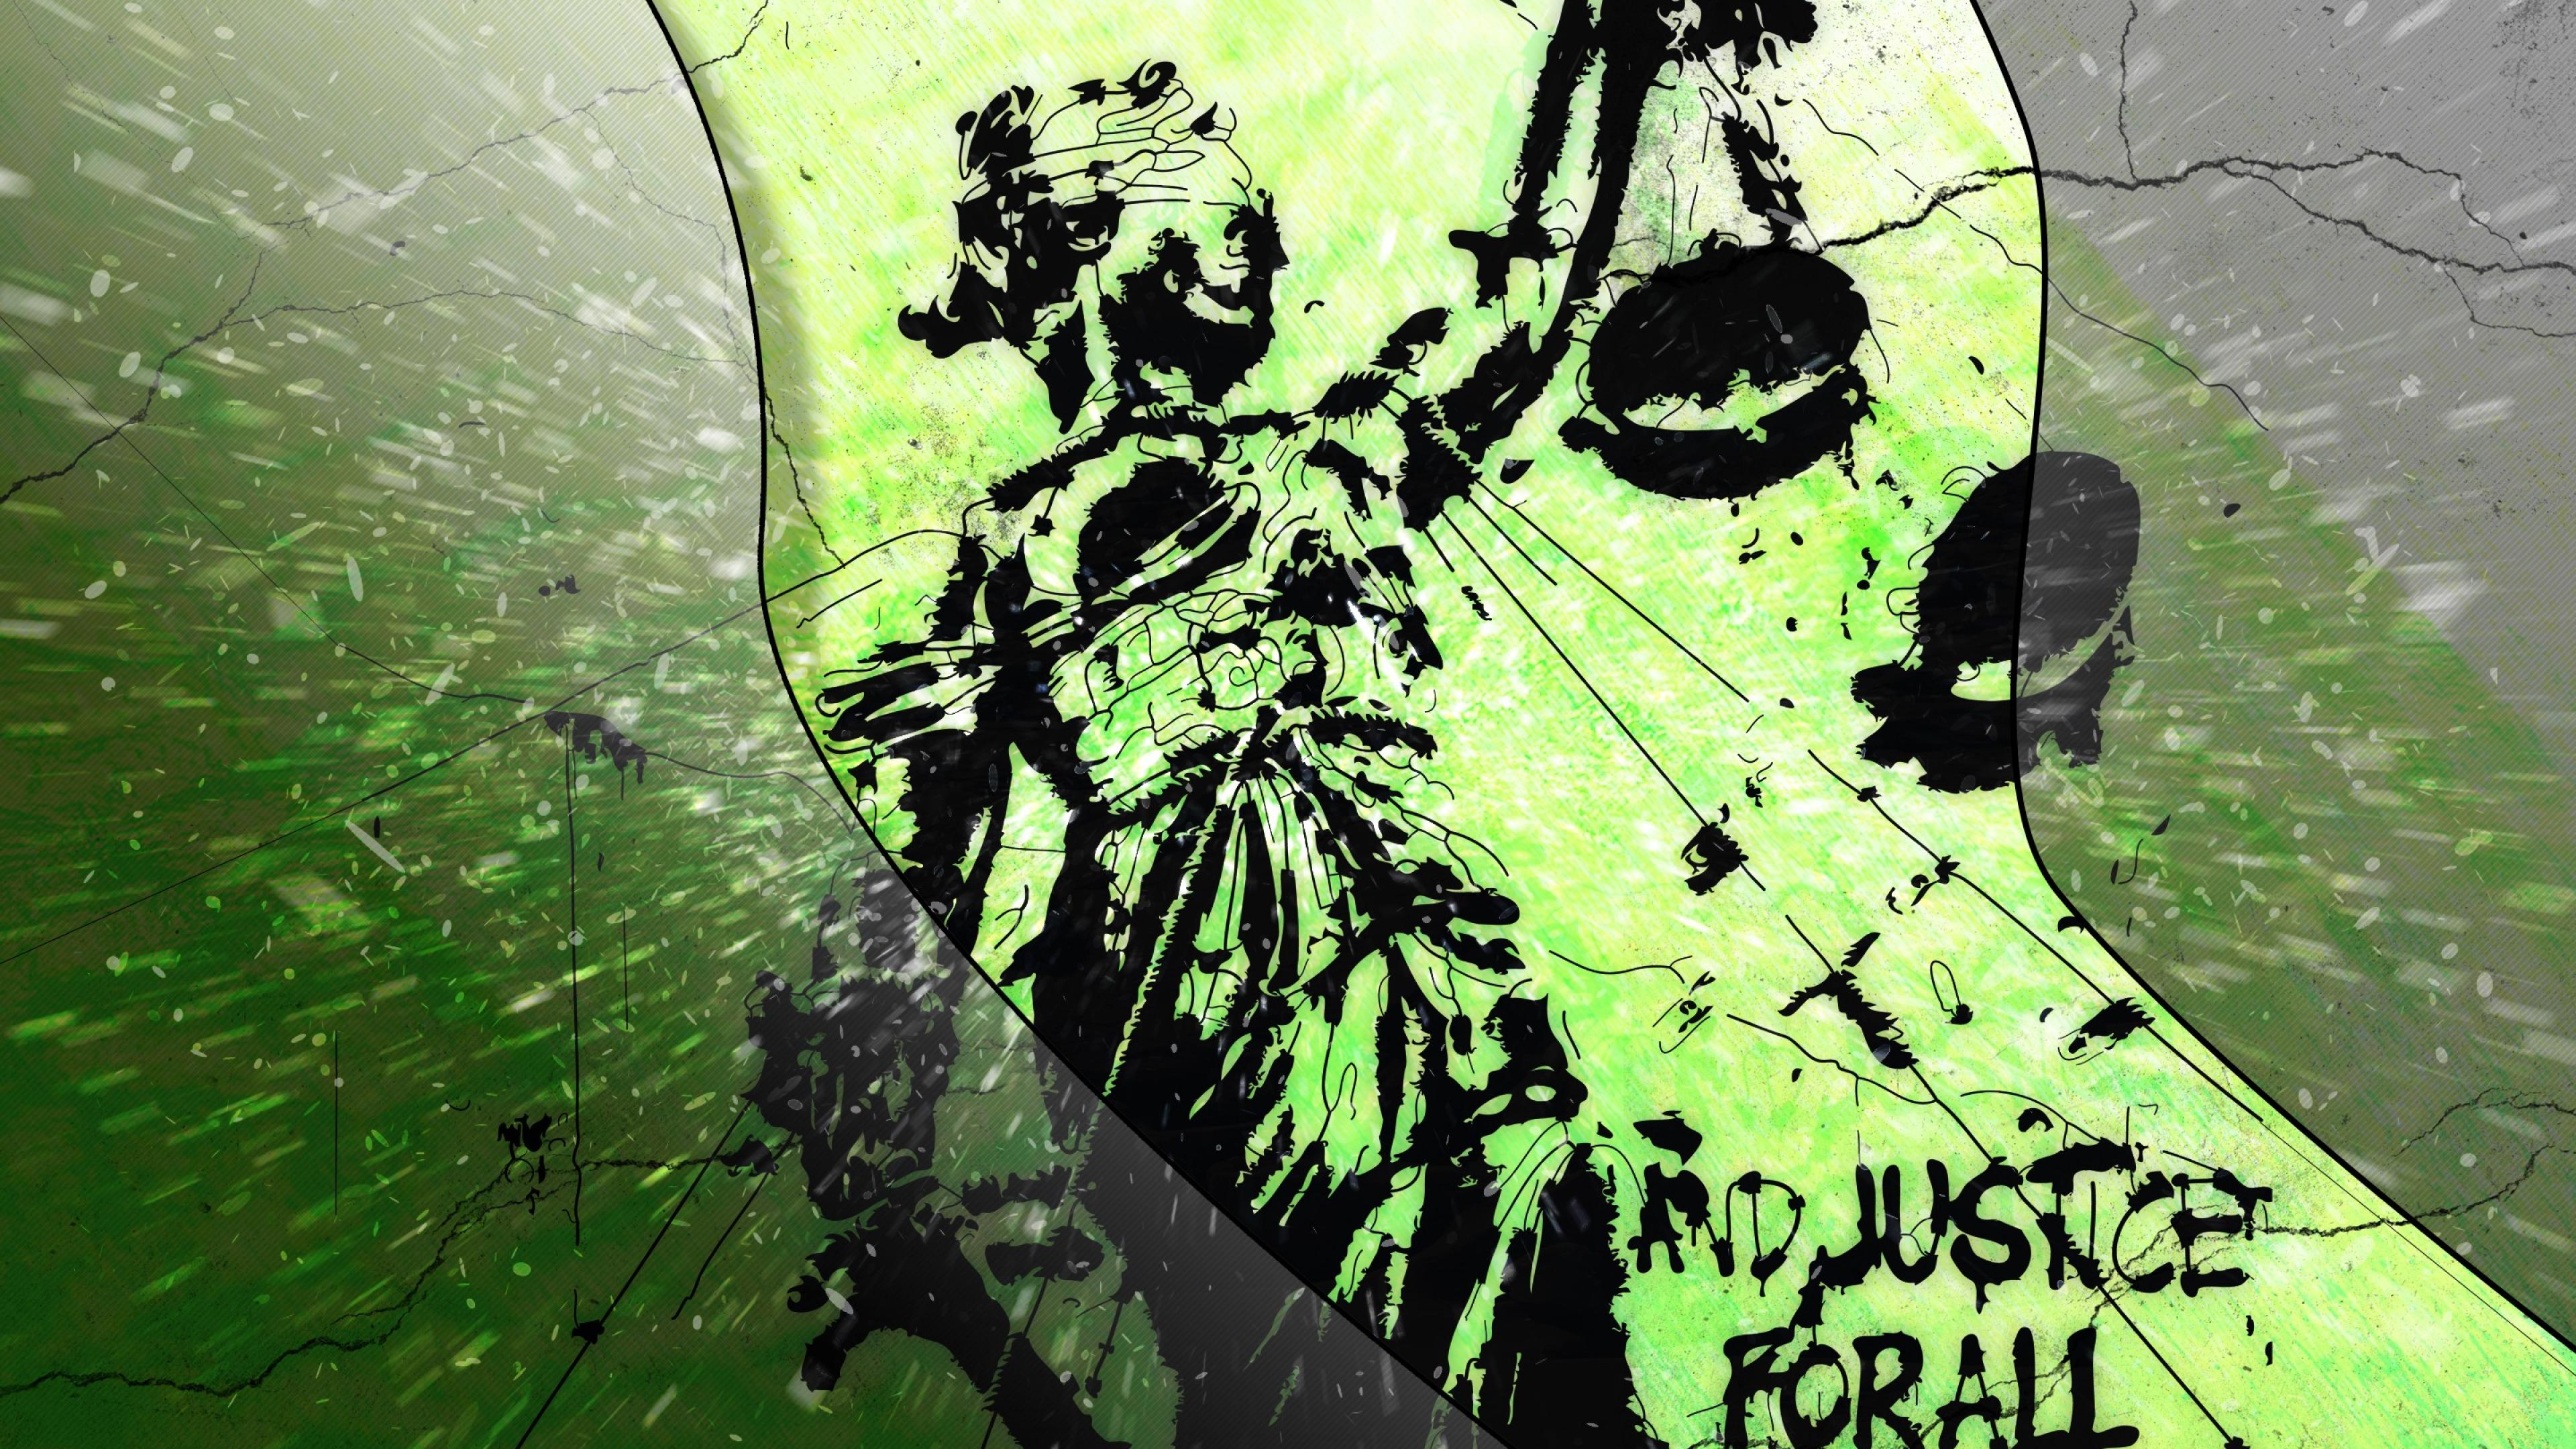 Metallica And Justice For All Wallpapers - Wallpaper Cave